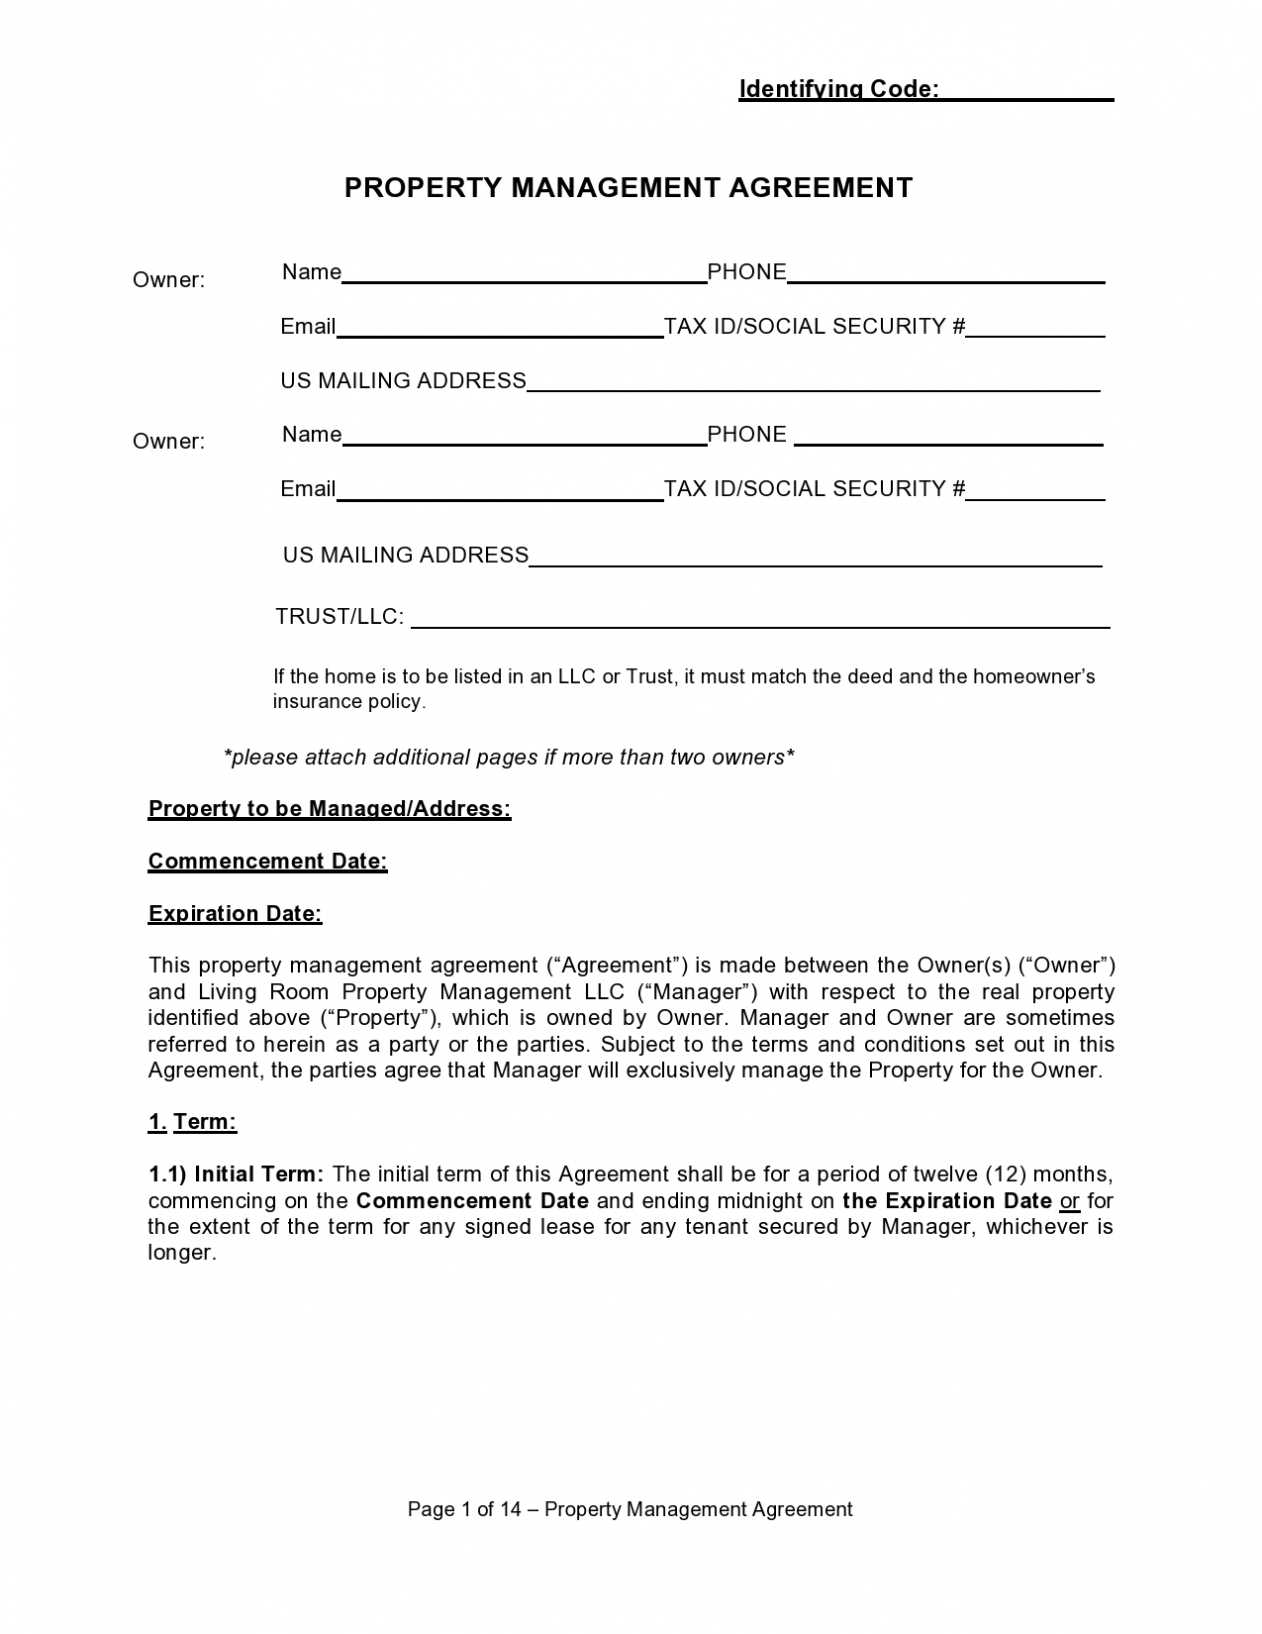 42 Simple Property Management Agreements [Word / Pdf] ᐅ for Free Commercial Property Management Agreement Template